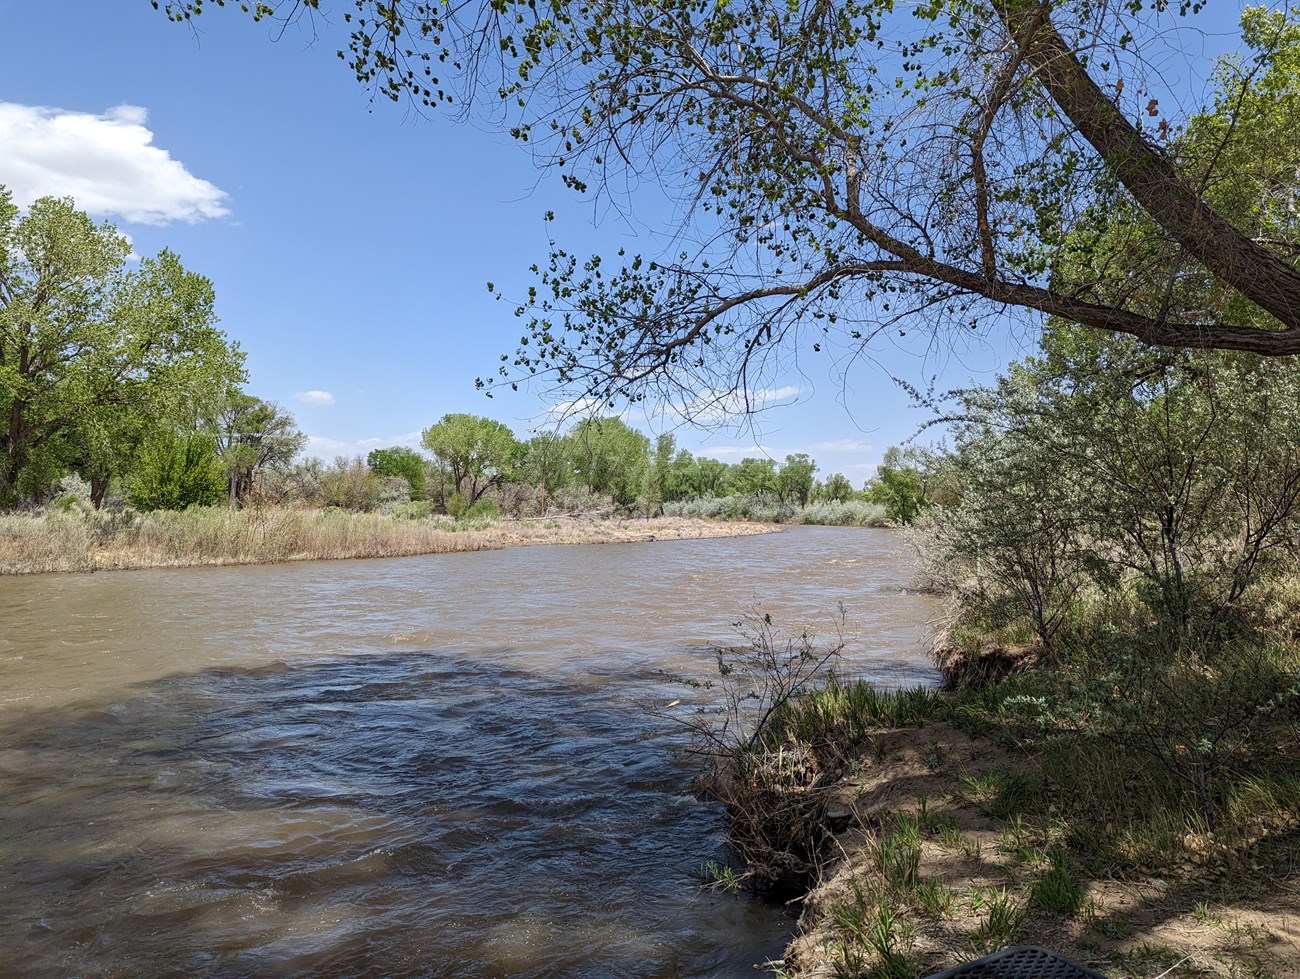 The Animas River, full of meltwater and sediment from the San Juan Mountains, as photographed in May 2022 near Aztec Ruins.